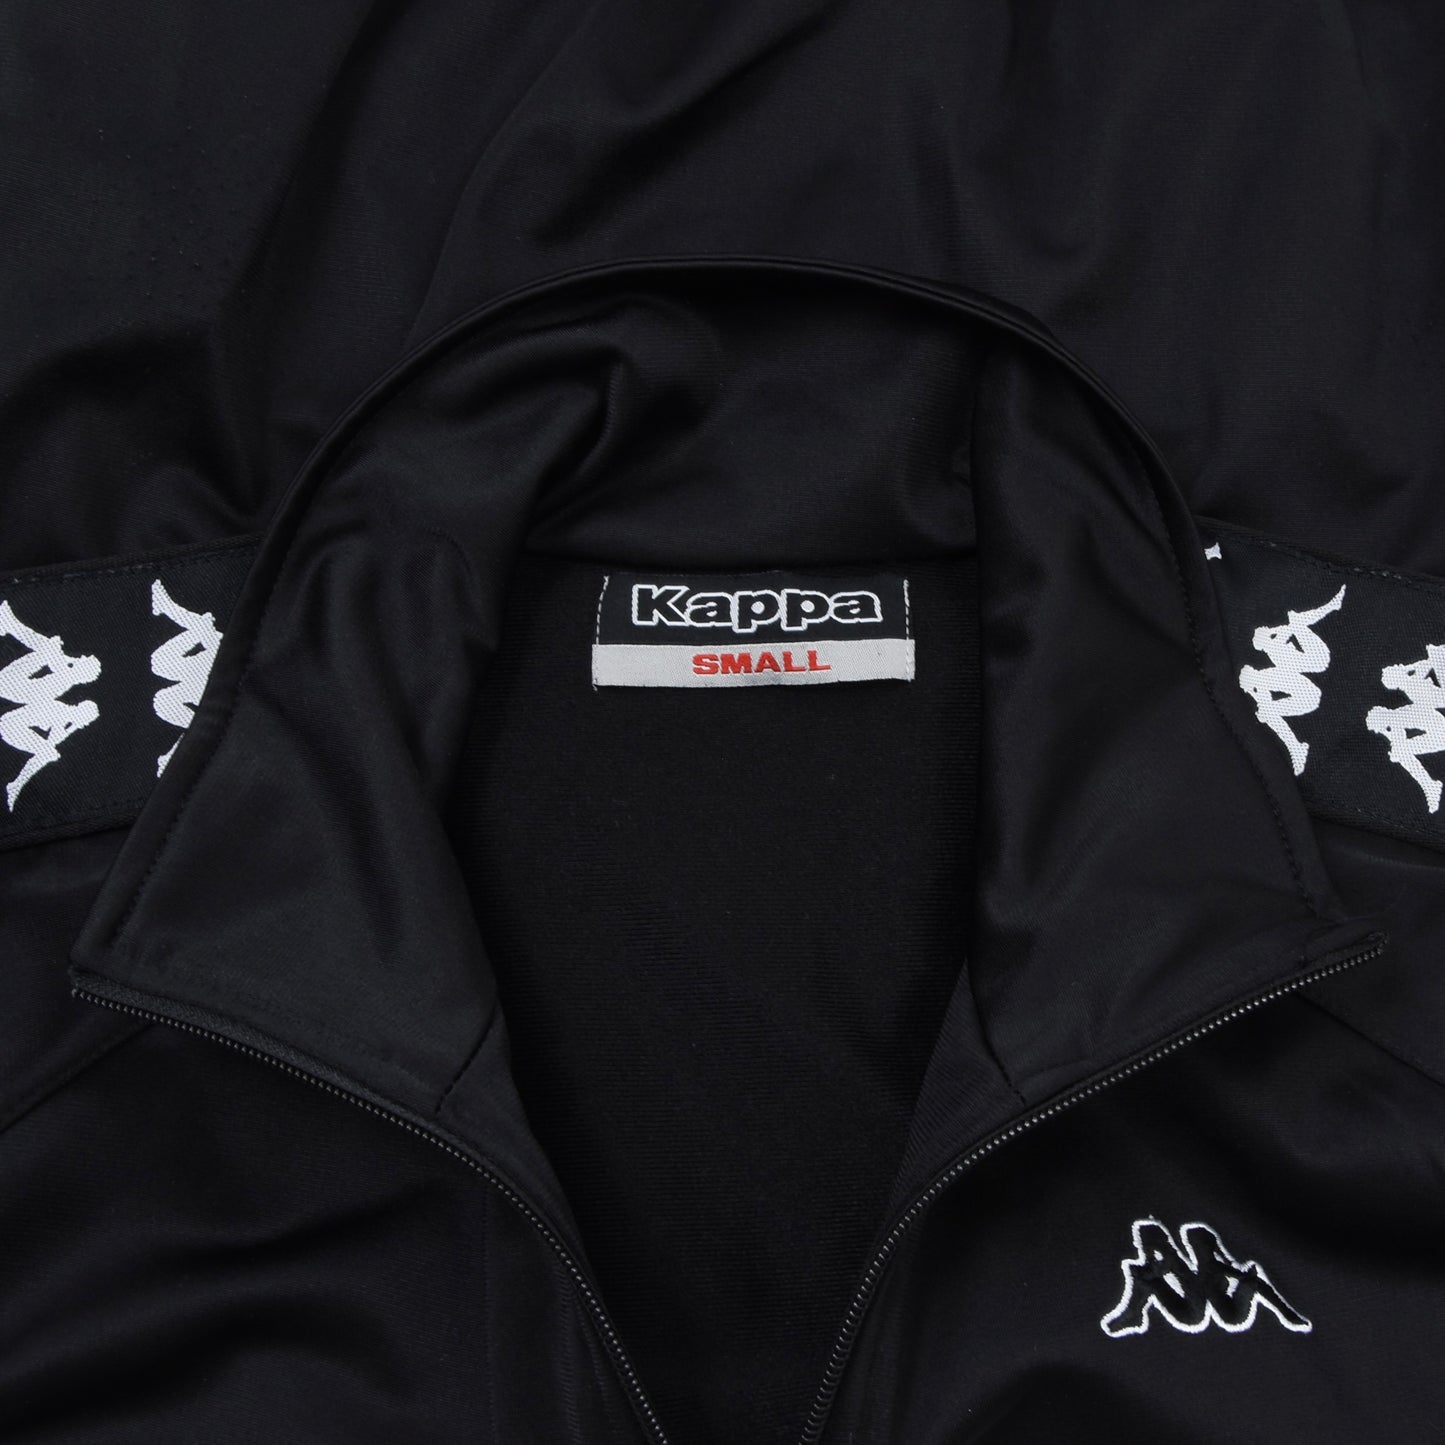 Kappa Track Suit Size Small - Black